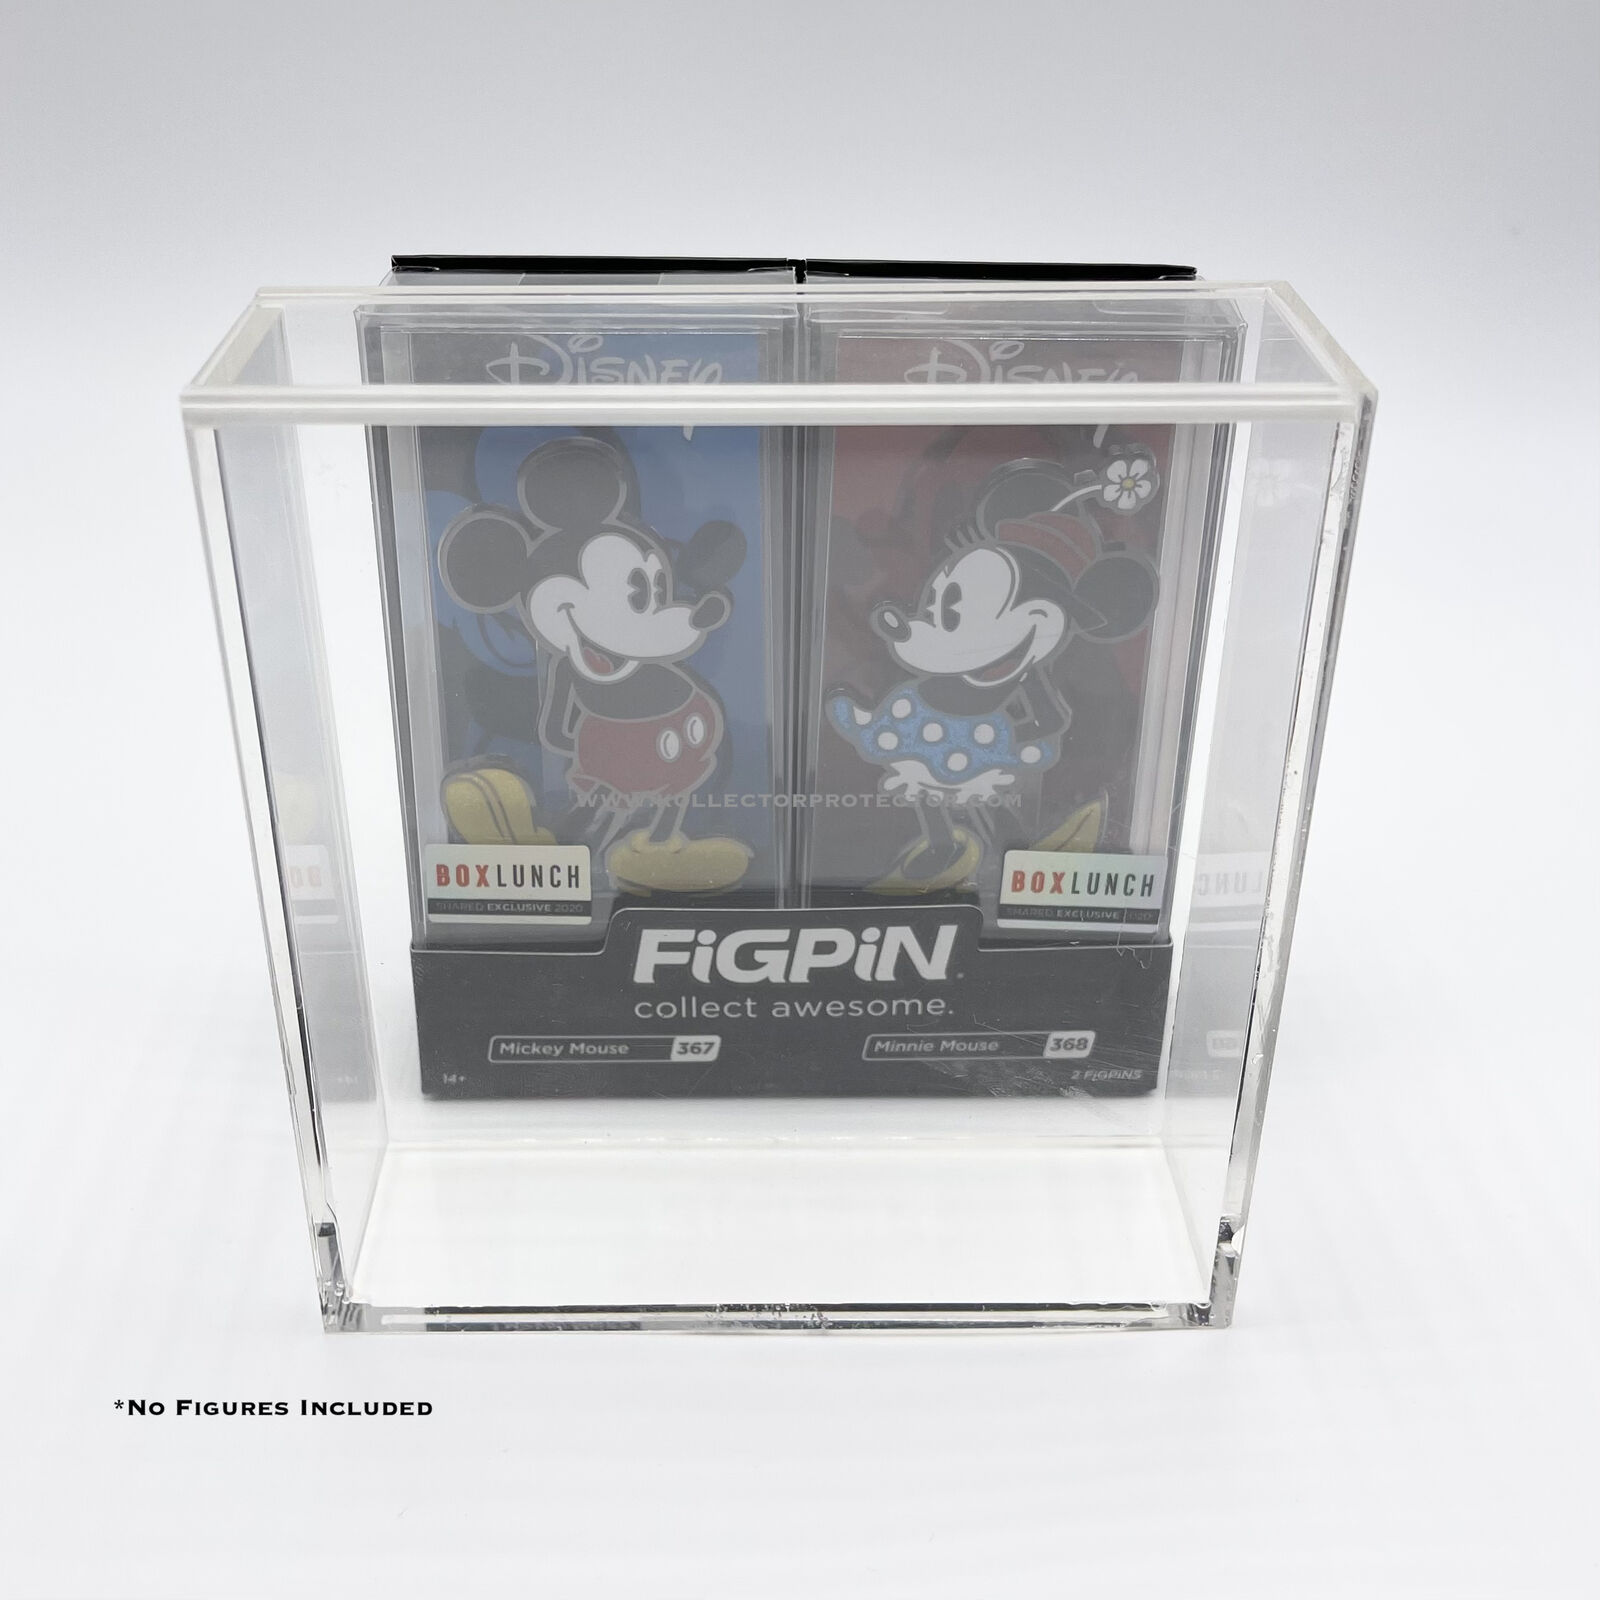 5 UV PROTECTED FiGPiN 2 Pack Size 4mm thick acrylic Case - Magnetic Slide Bottom